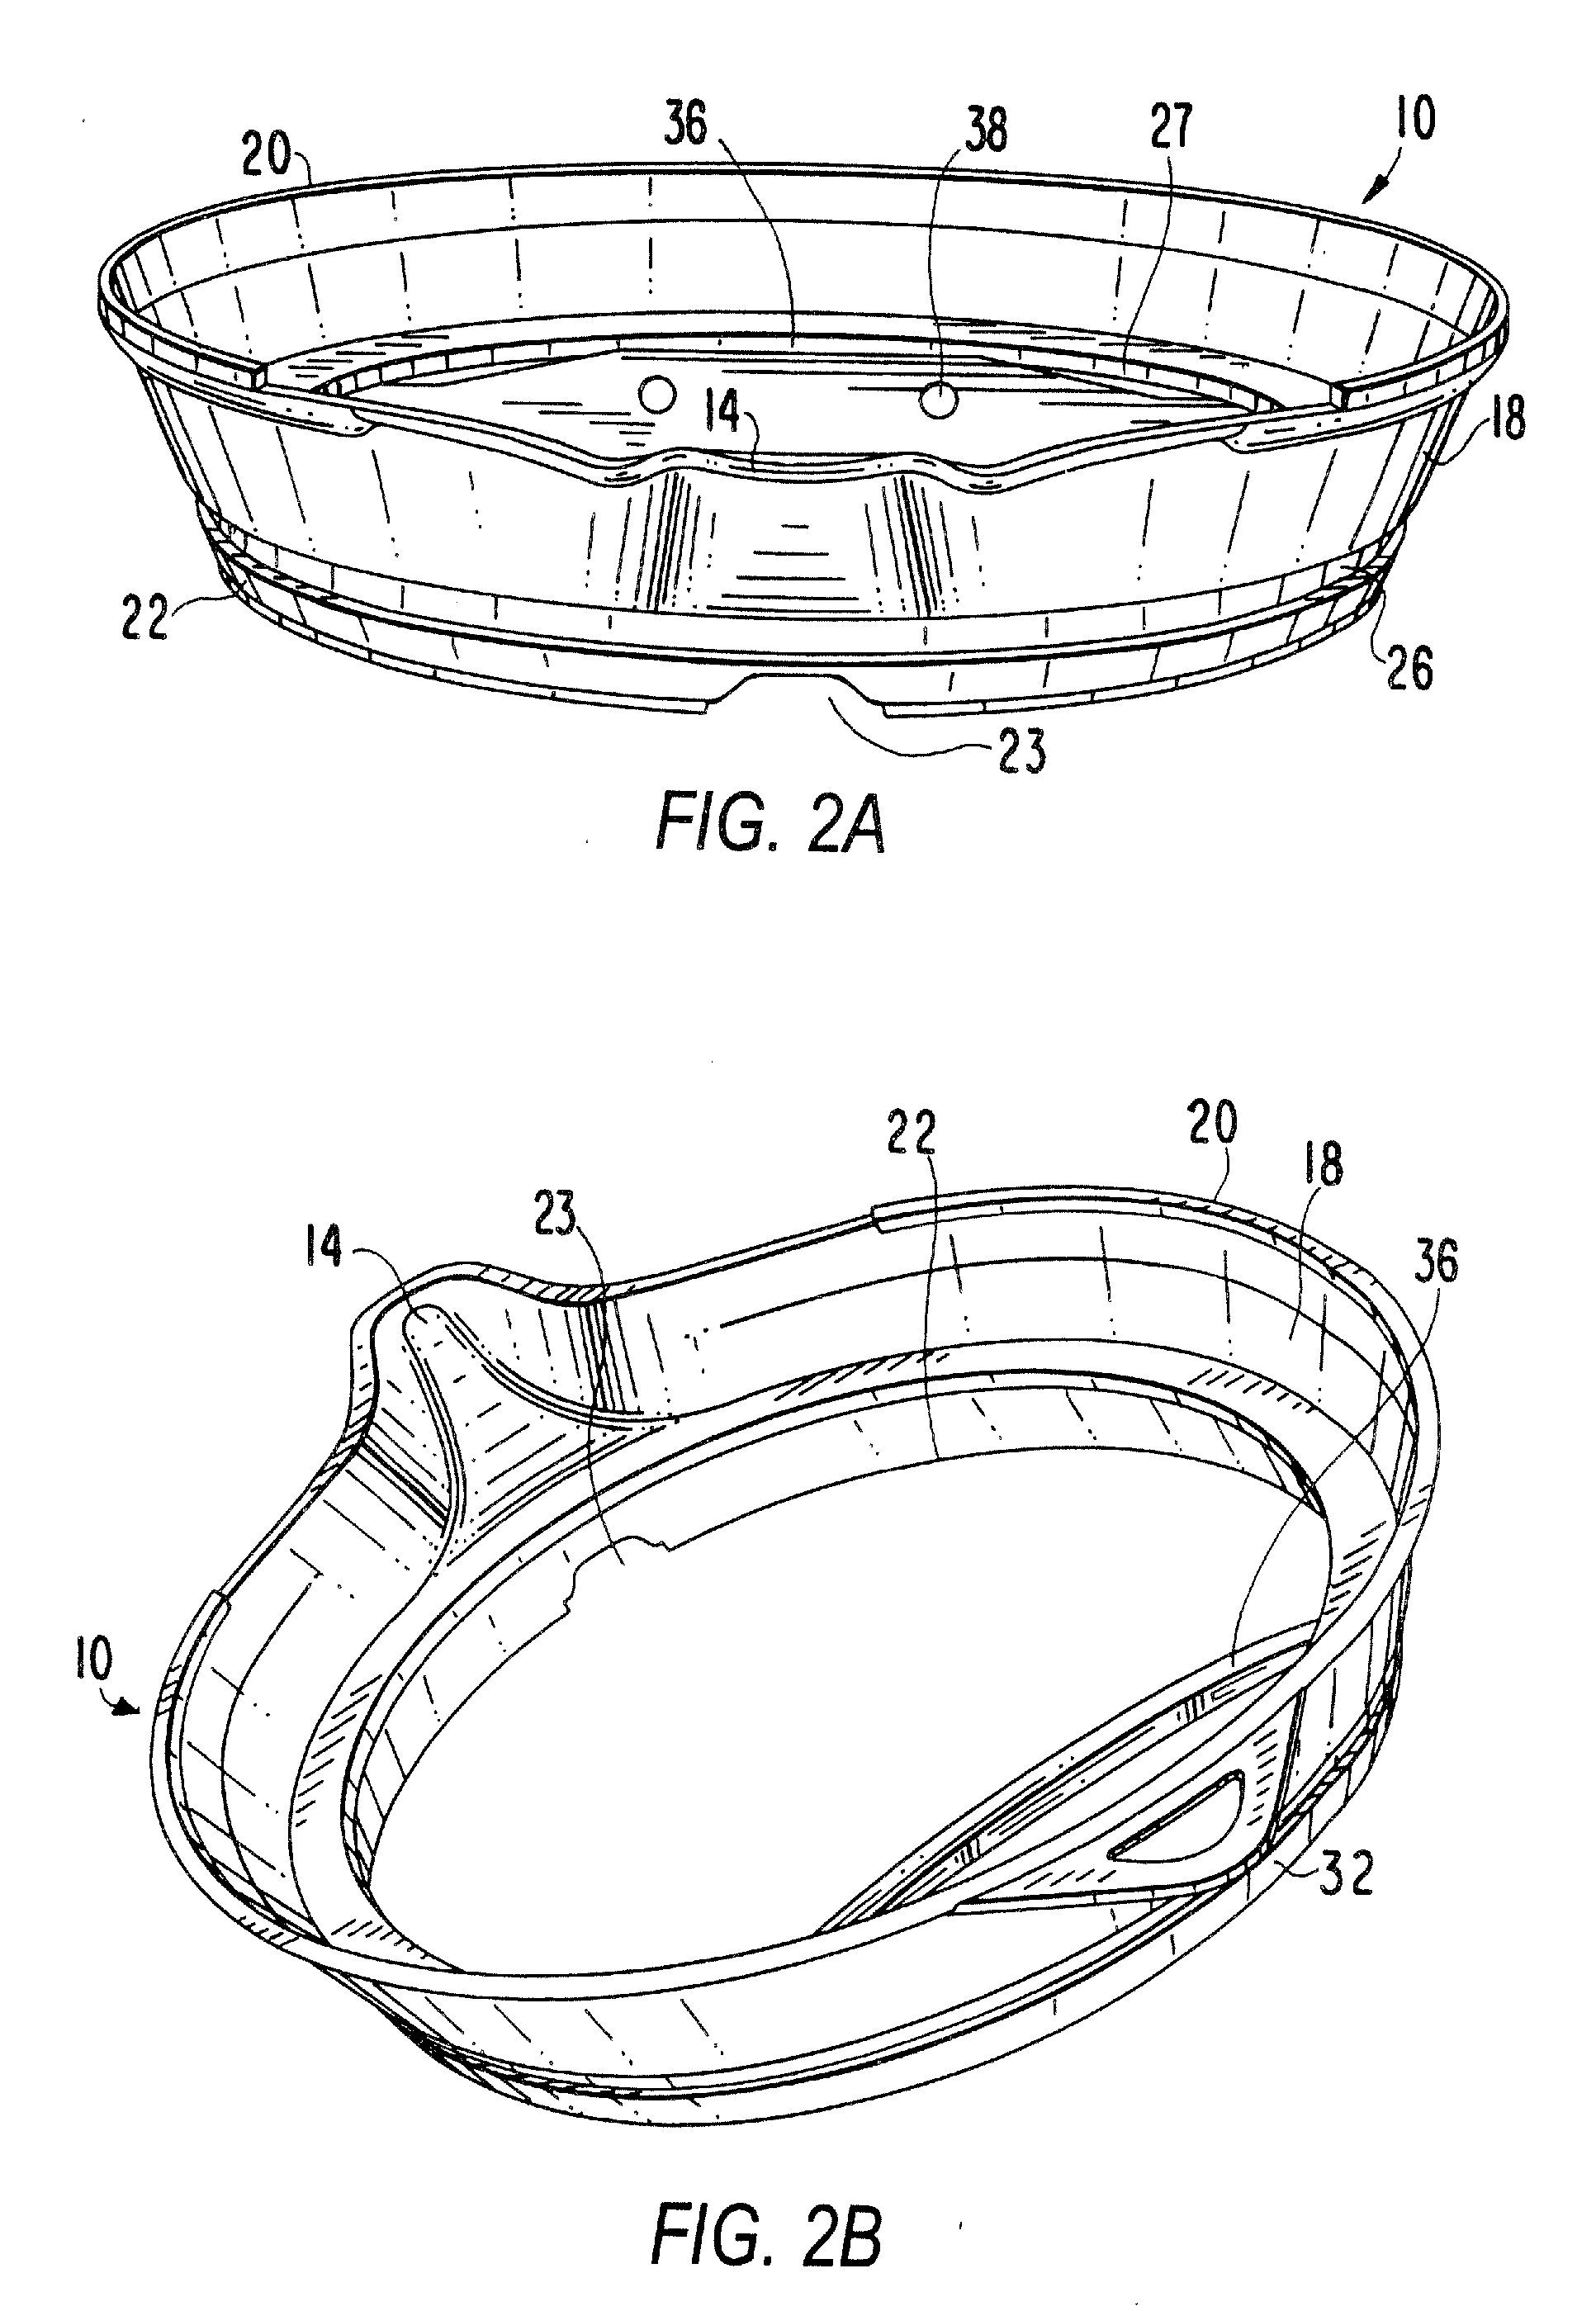 Multifunction pouring spout with pivoting handle